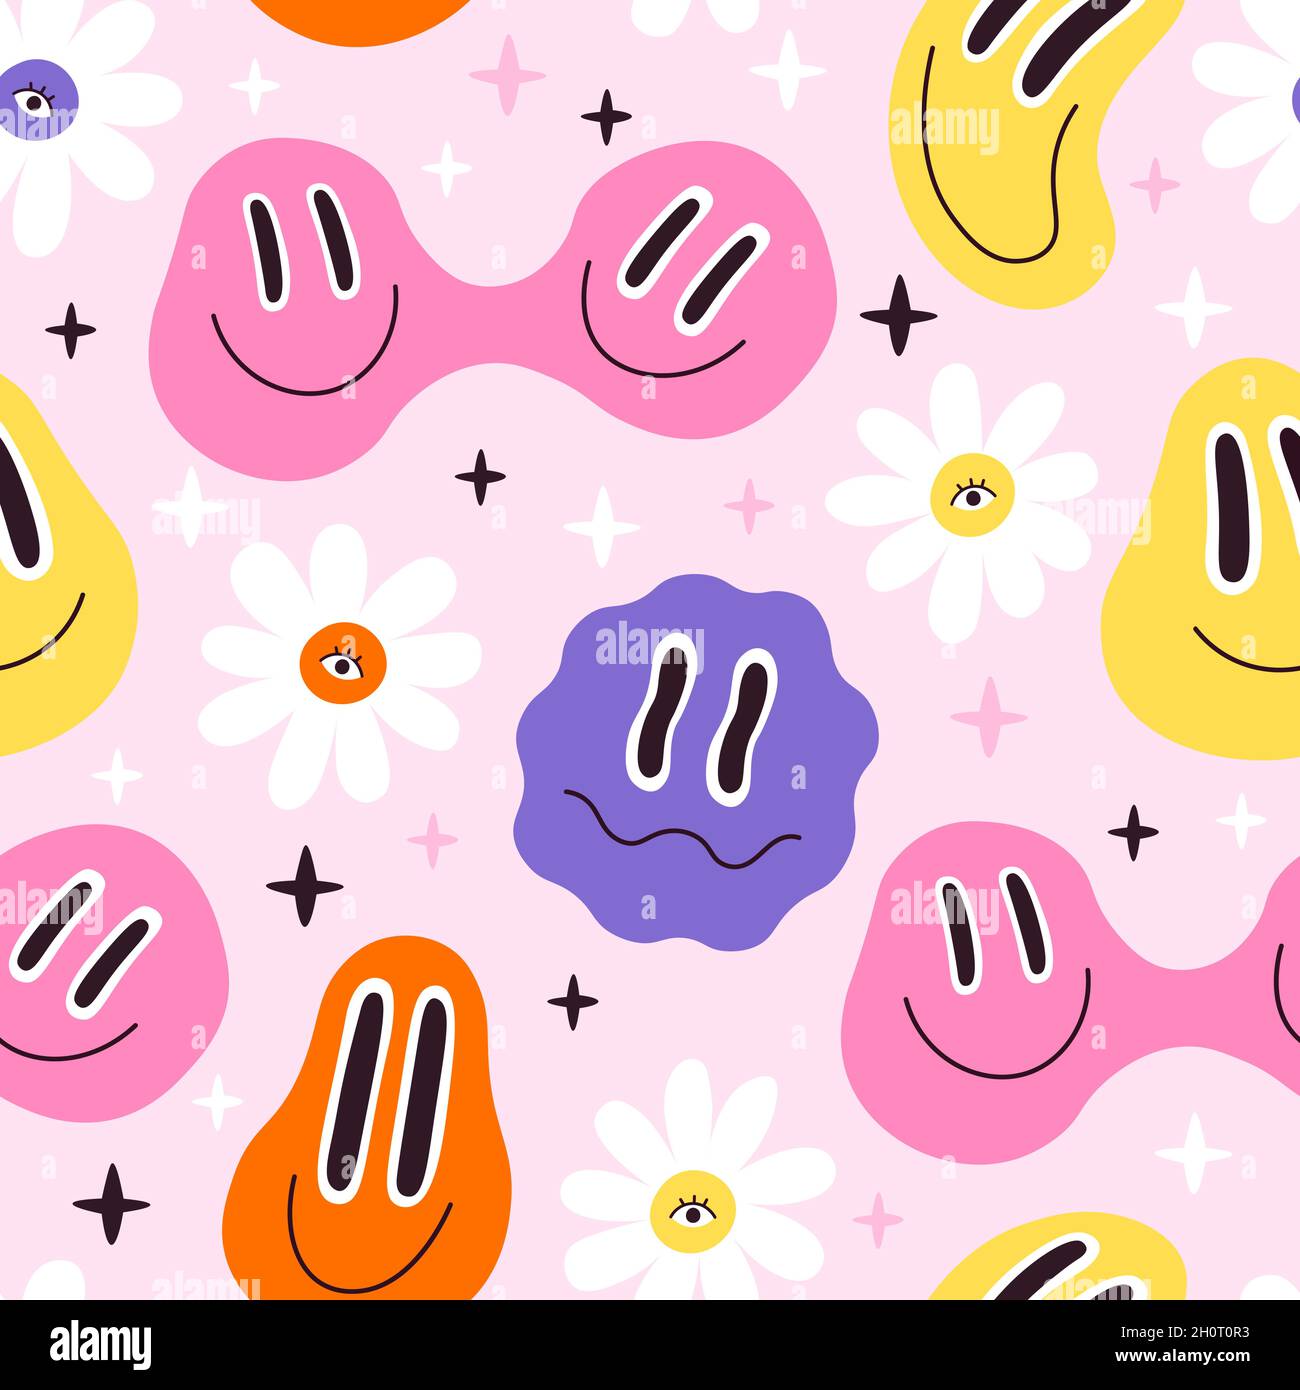 Melted Smiley Faces And Flowers Trippy Seamless Pattern Retro Hippie Psychedelic Distorted Emoji Lava Lamp Smiley Face Vector Wallpaper Stock Vector Image Art Alamy